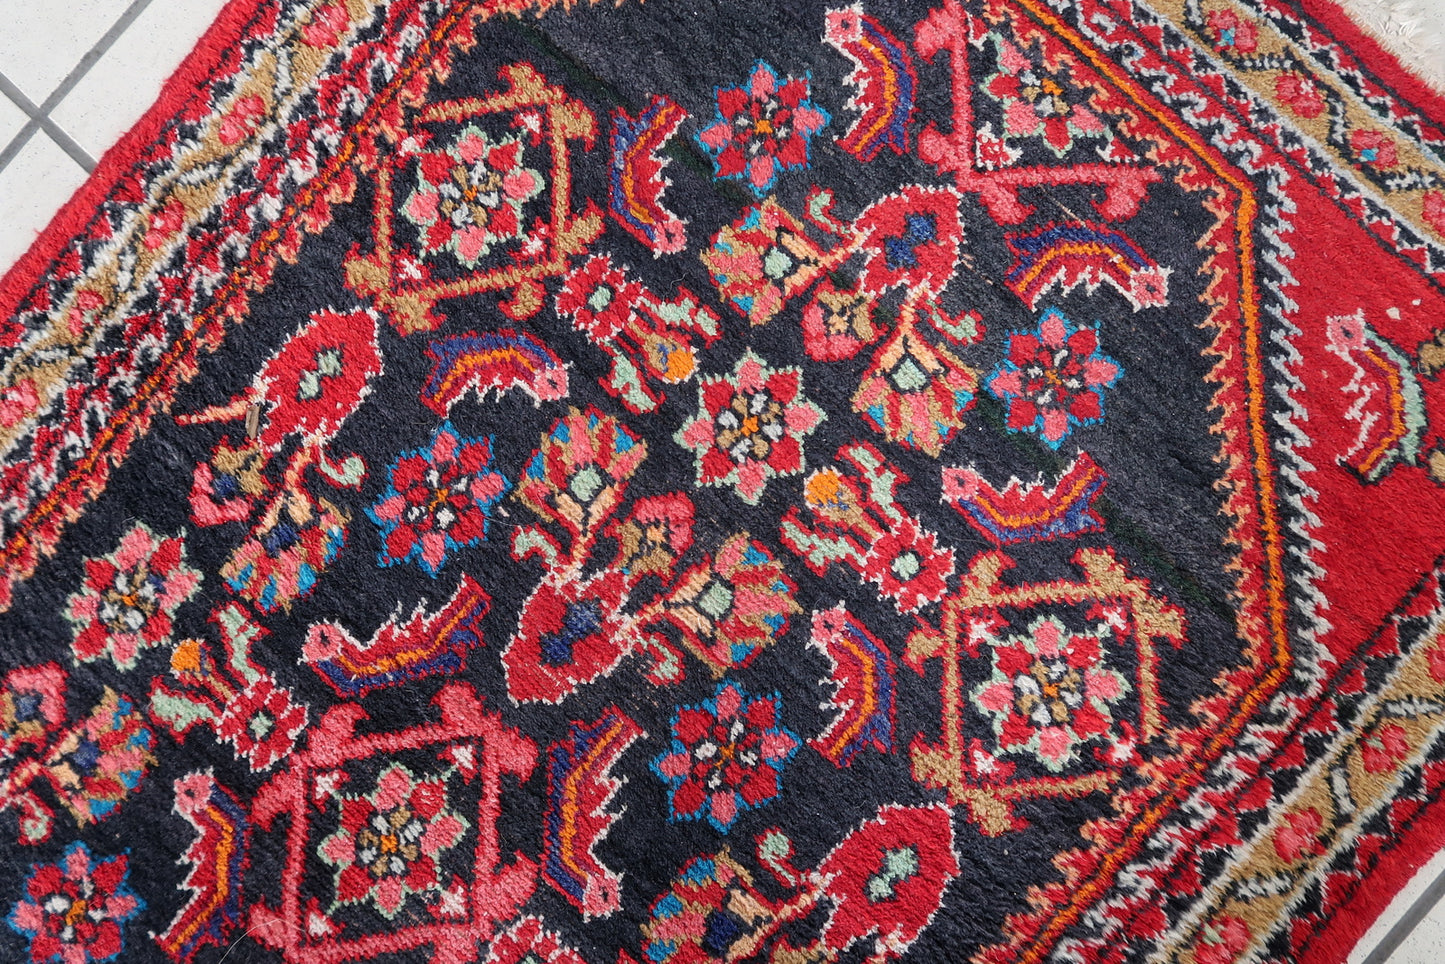 Close-up of good condition on Handmade Vintage Persian Hamadan Rug - Detailed view emphasizing the rug's well-preserved state.